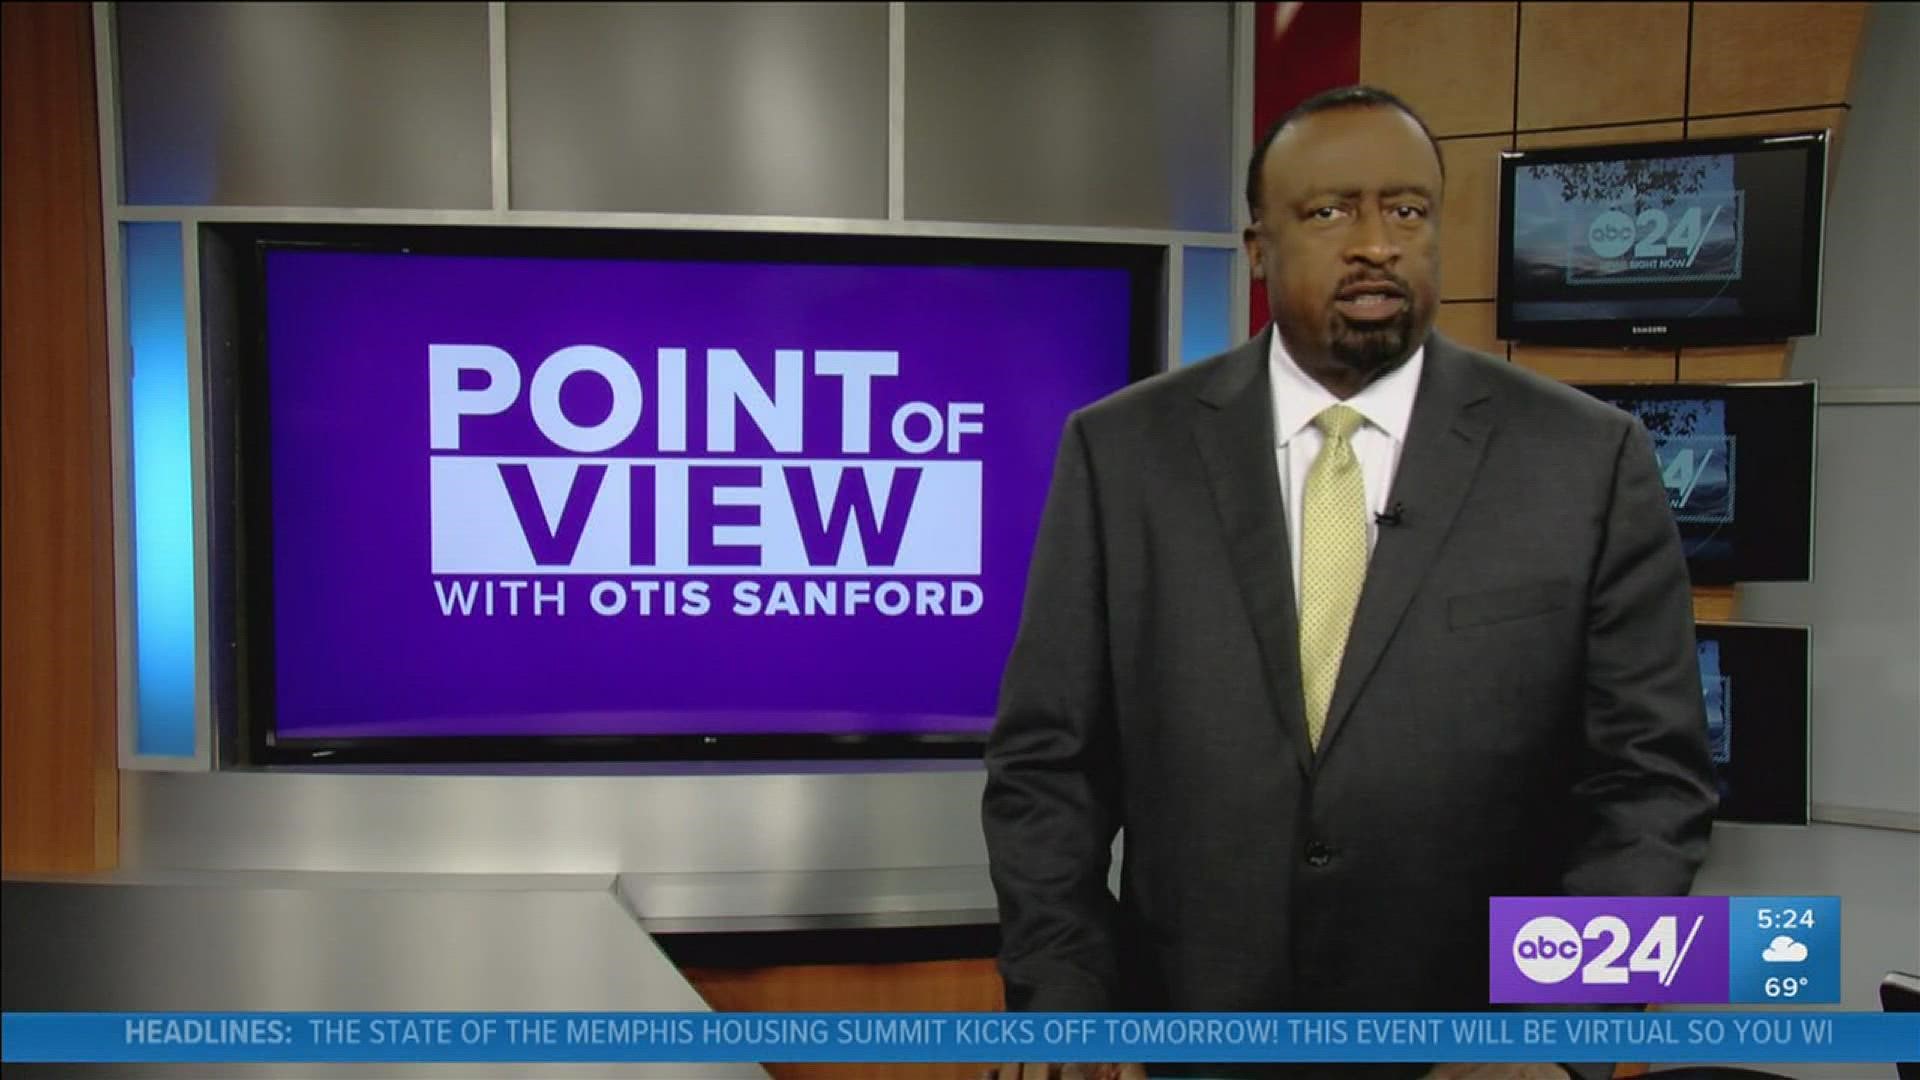 Political analyst and commentator Otis Sanford shared his point of view on local State Senators facing criminal charges.